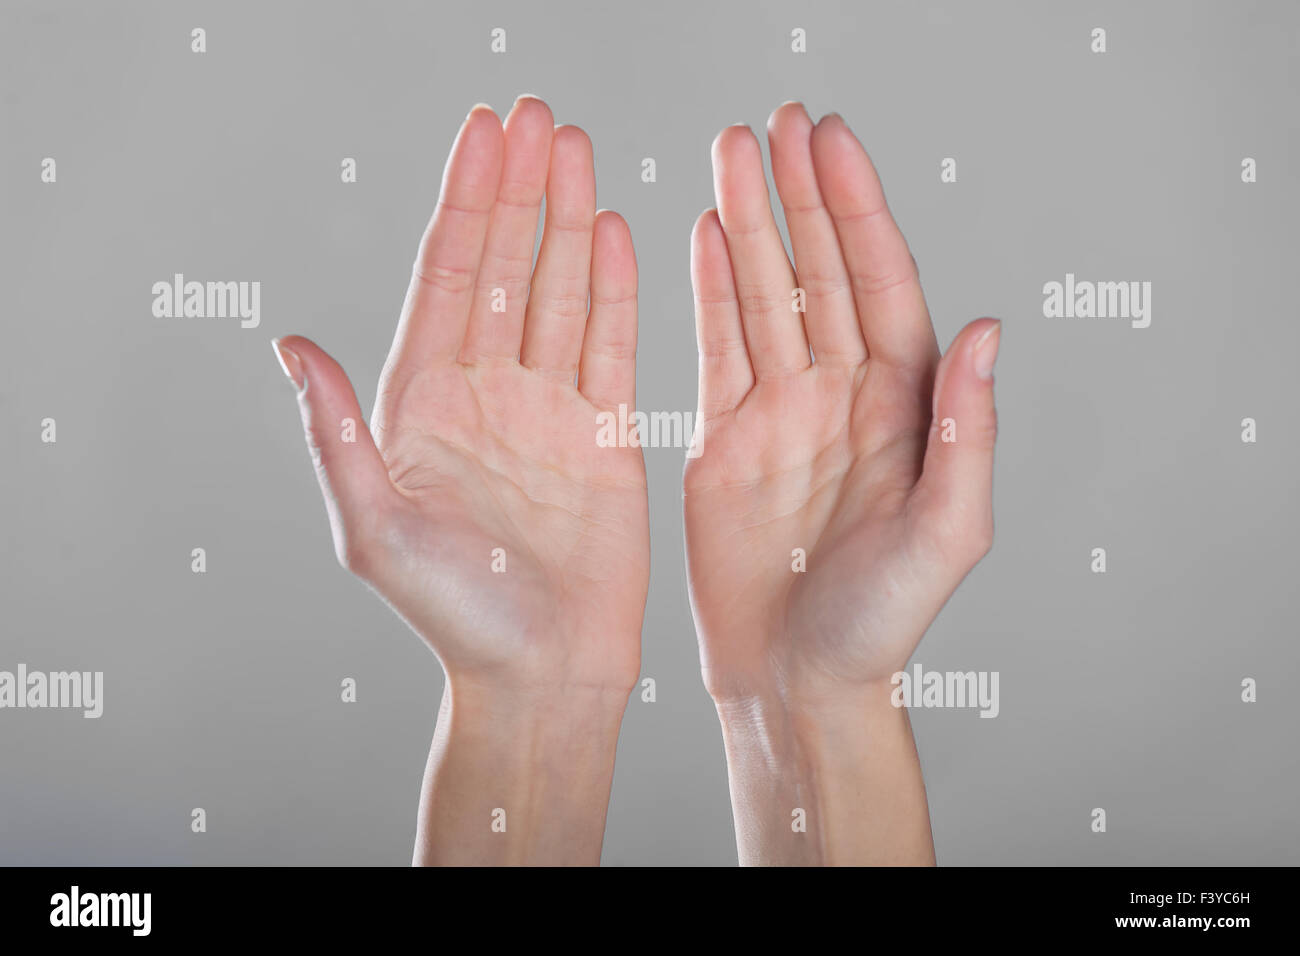 Open hands on gray background Stock Photo